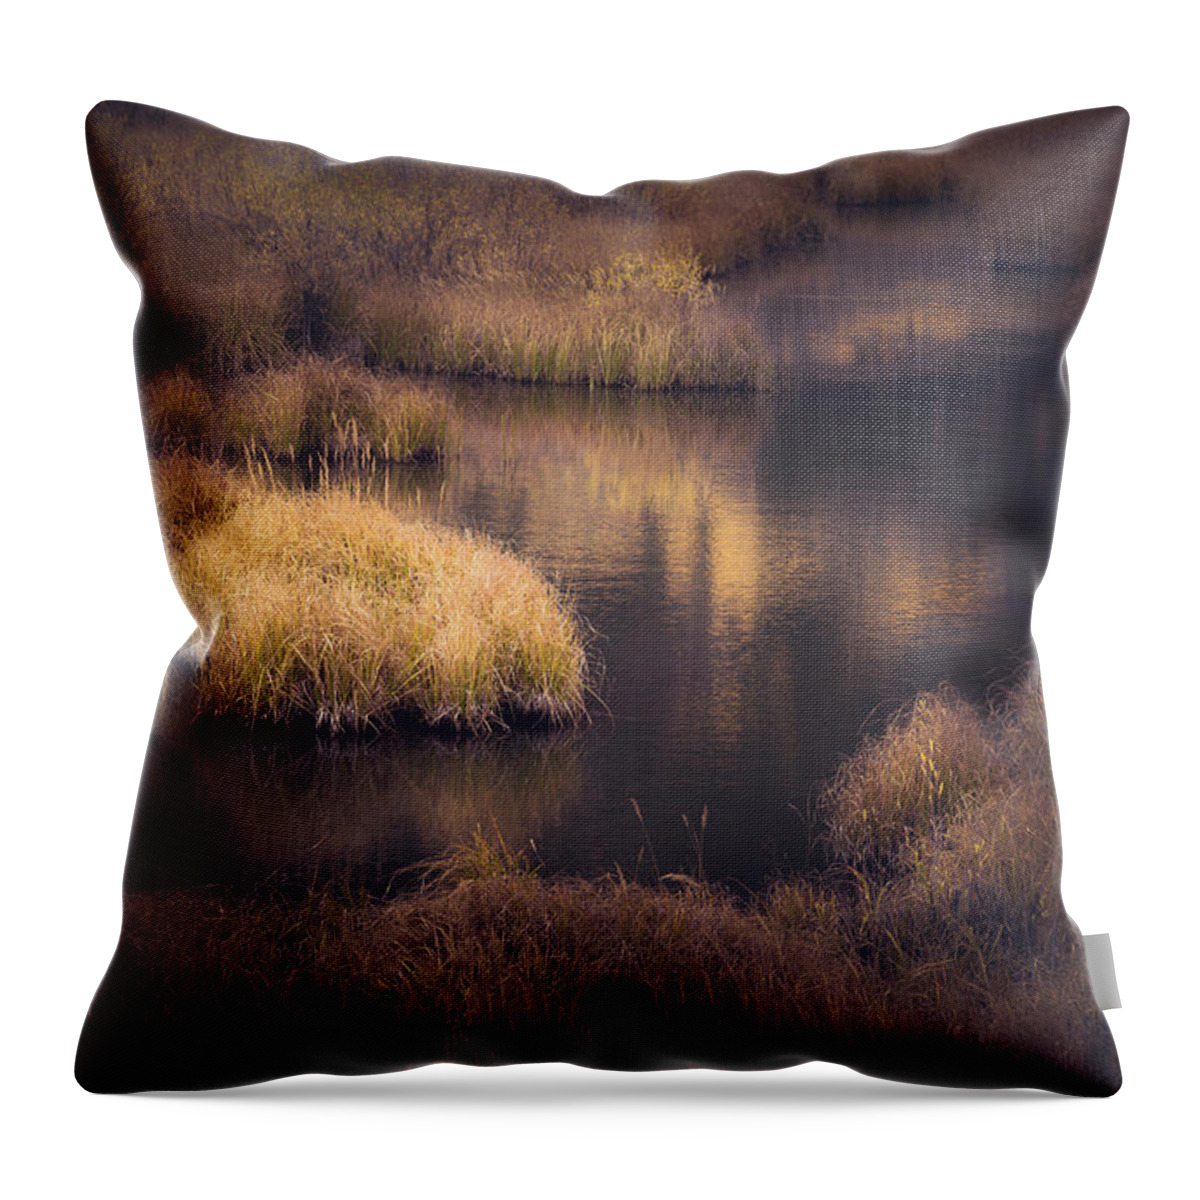 Fall Throw Pillow featuring the photograph Meandering by The Forests Edge Photography - Diane Sandoval